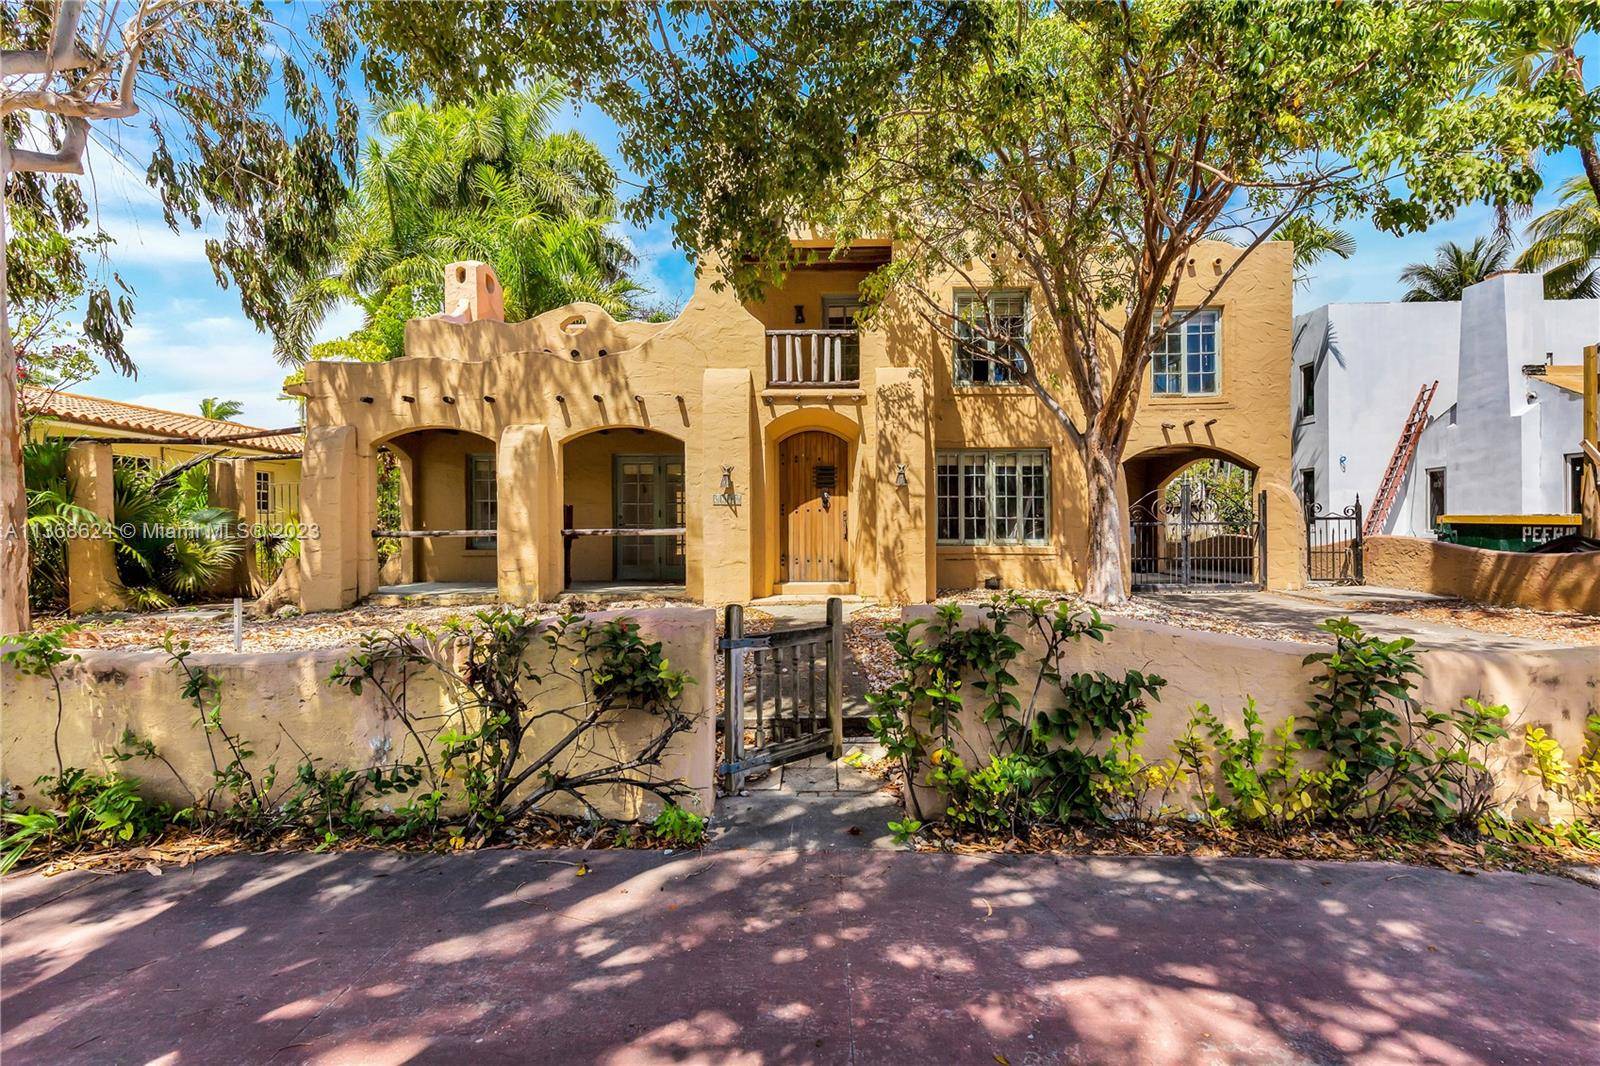 5208 Alton Rd is a unique Santa Fe Adobe style Single Family Home ready for complete renovations and or build your own exquisite 2 Story Residence in the heart of ...